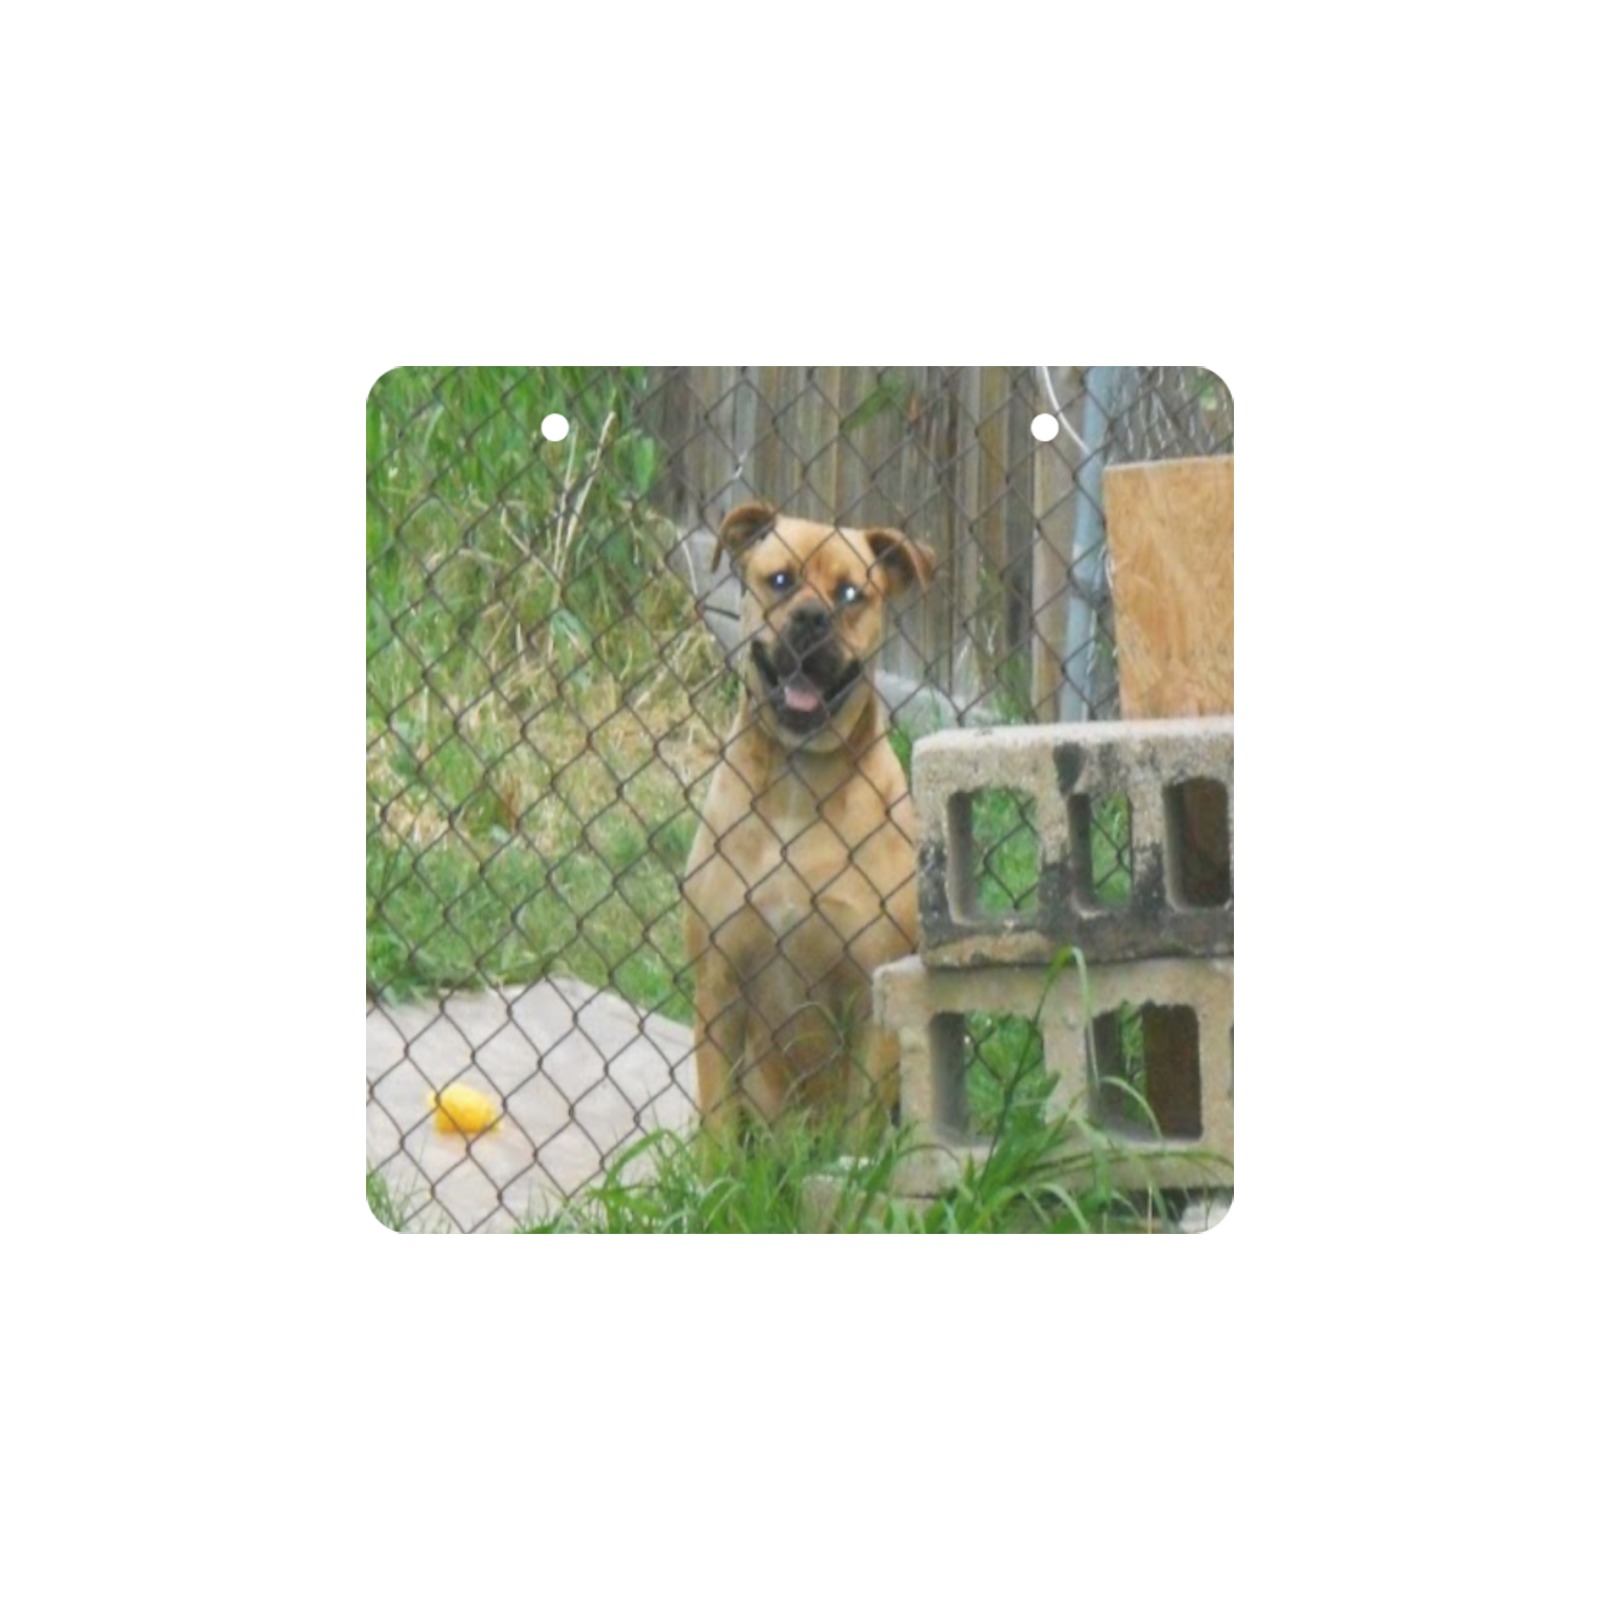 A Smiling Dog Square Wood Door Hanging Sign